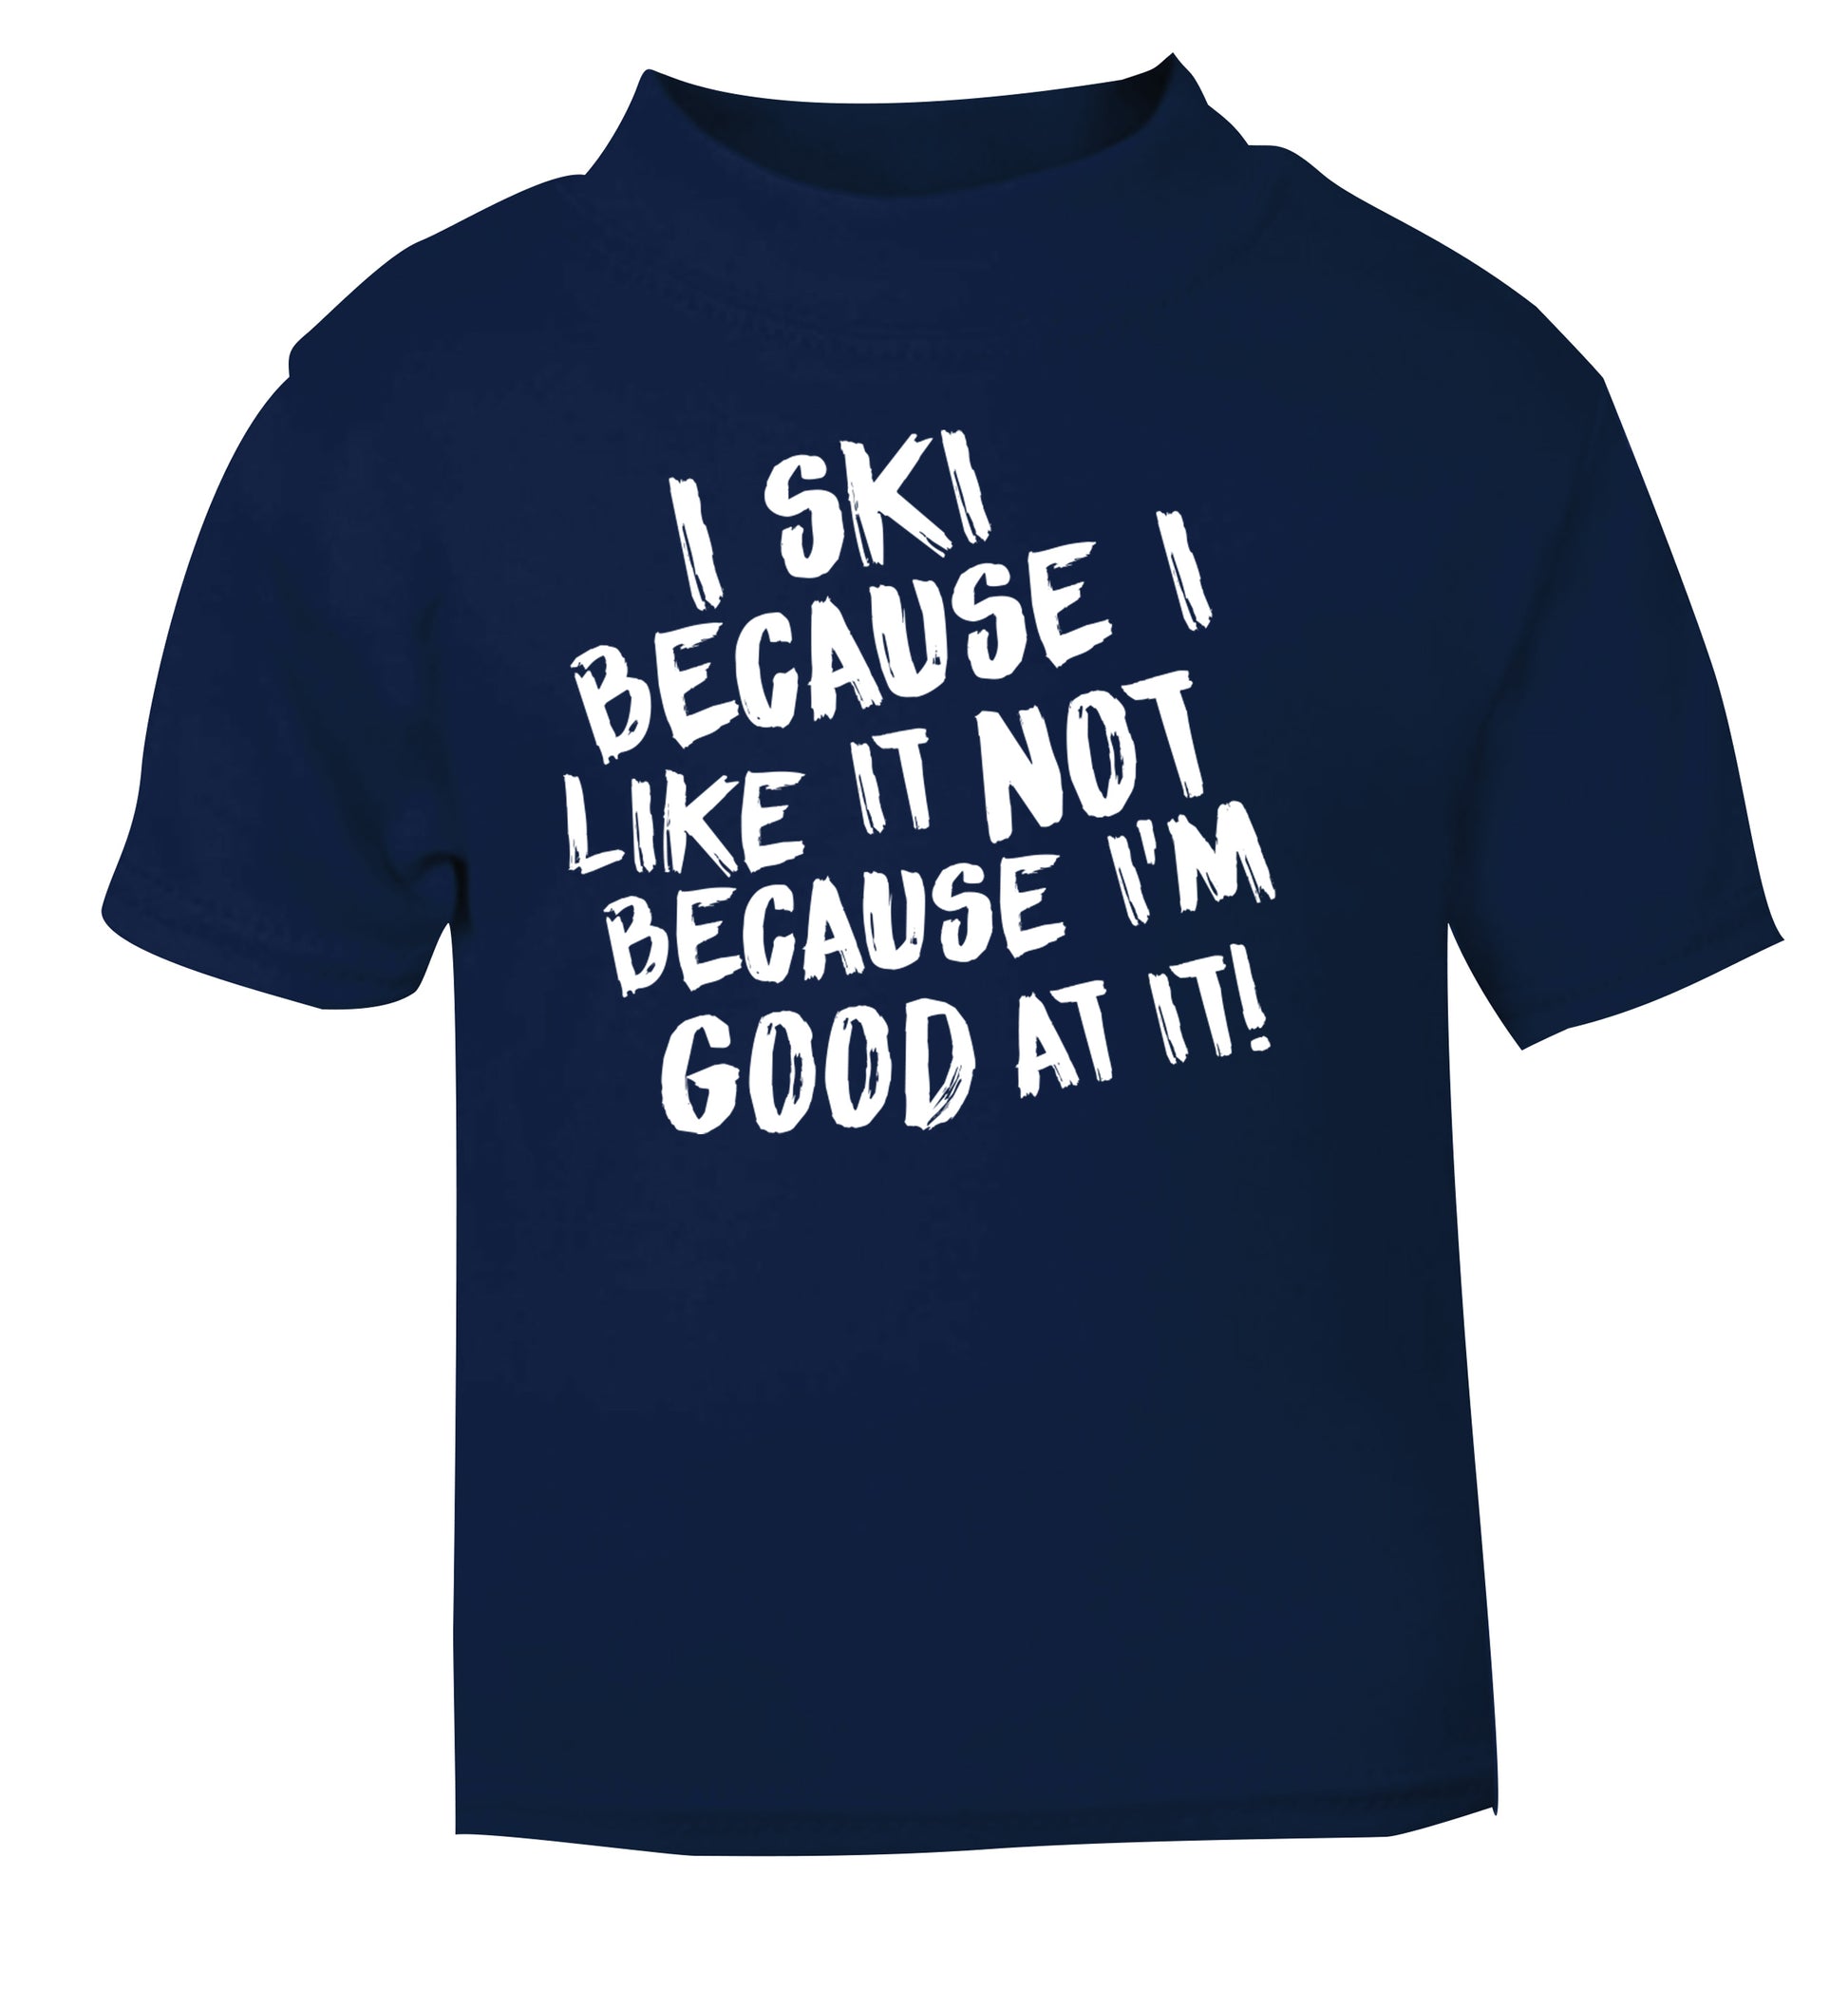 I ski because I like it not because I'm good at it navy Baby Toddler Tshirt 2 Years